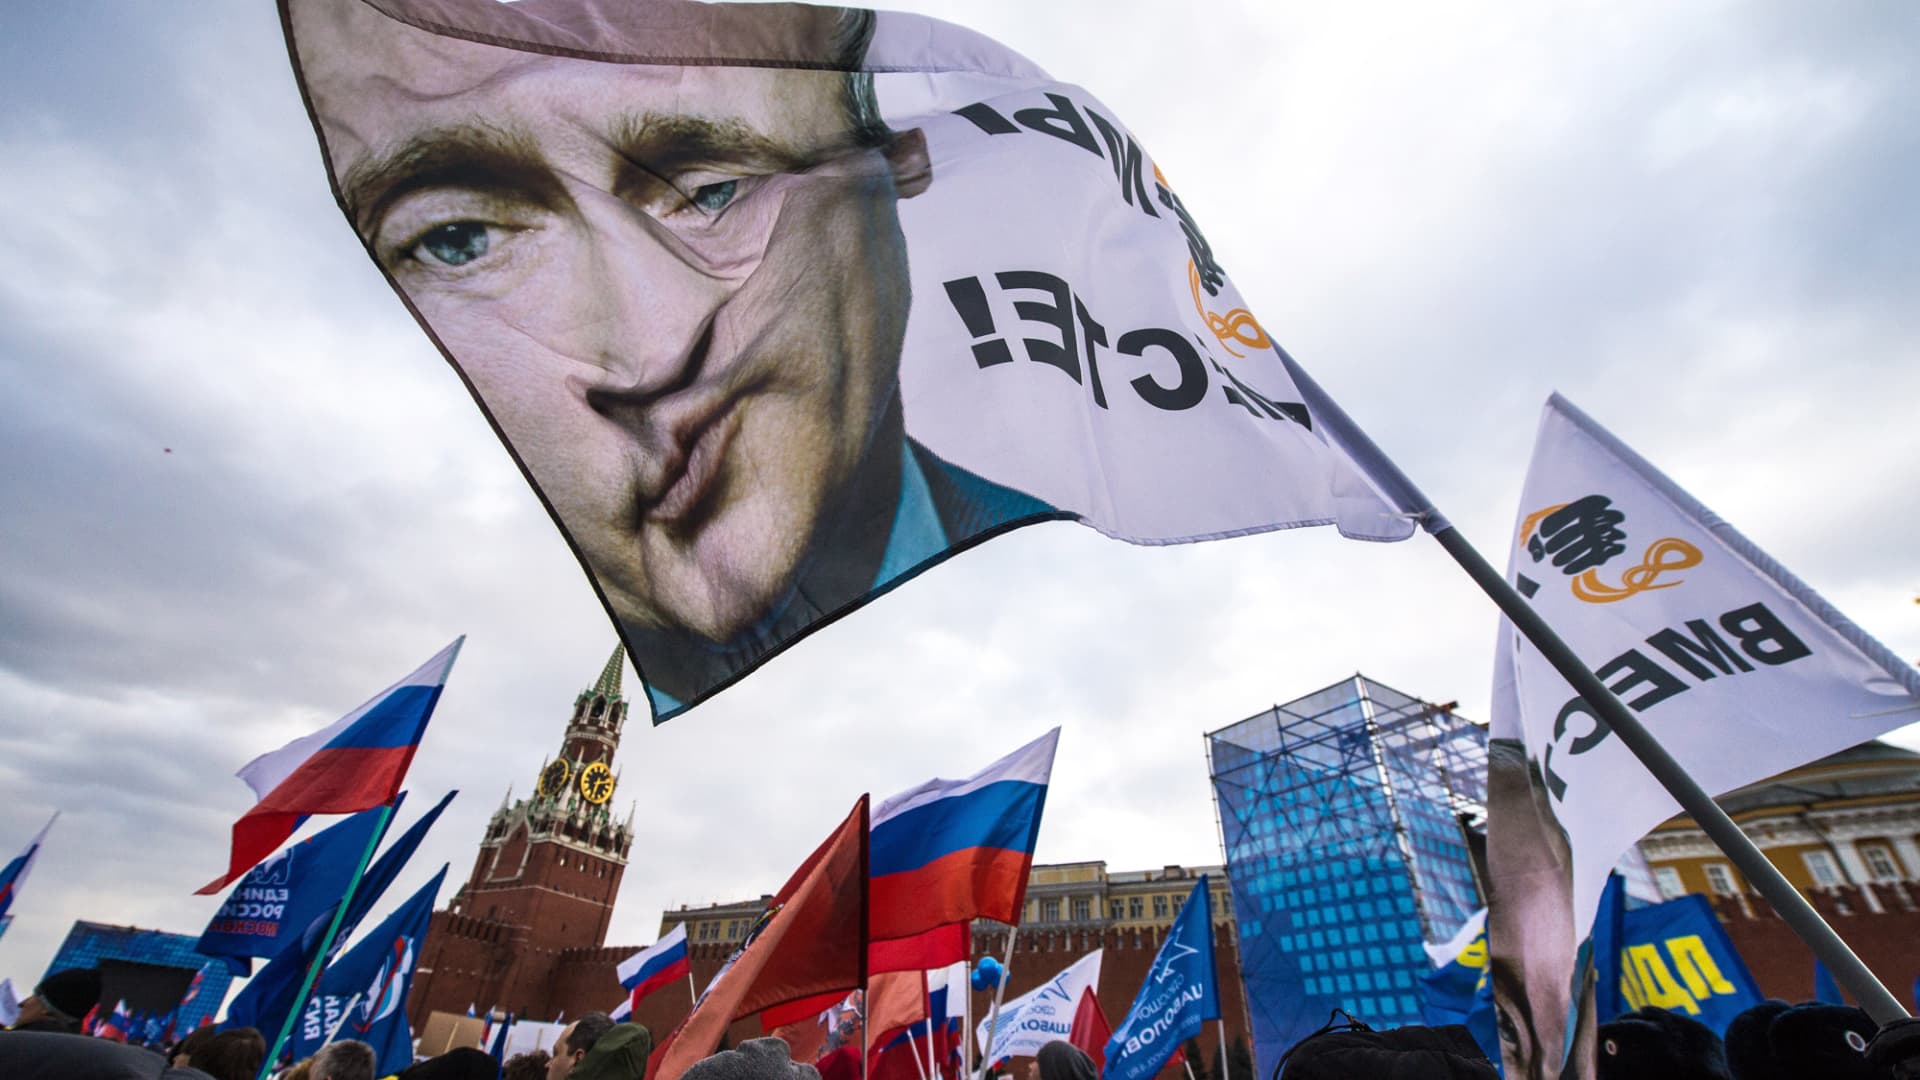 With a flag depicting President Vladimir Putin, pro-Kremlin activists rally in Red Square, Moscow, March 18, 2014, to celebrate the incorporation of Crimea.